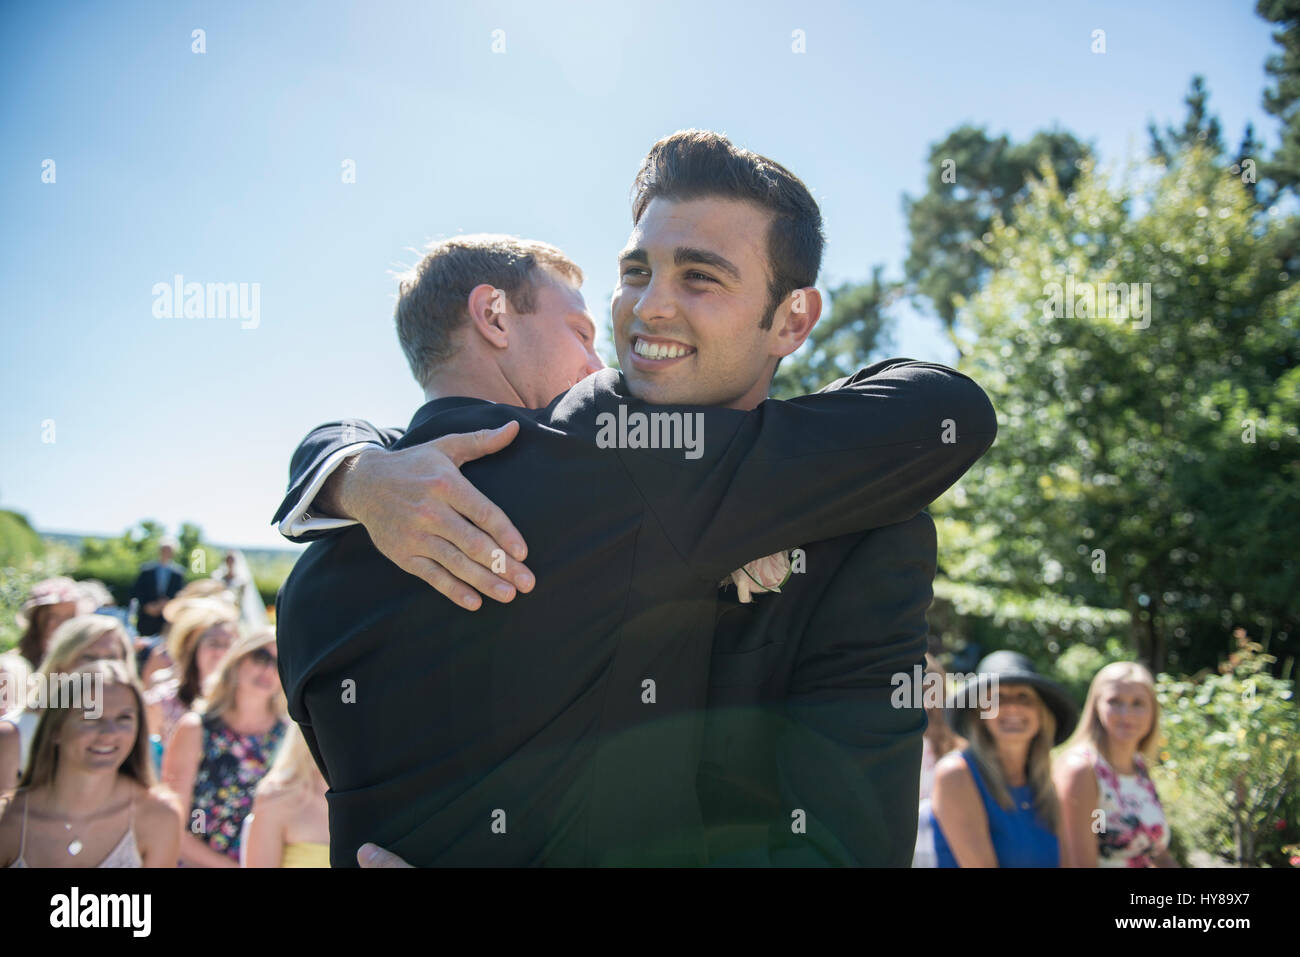 A groom and best man share a hug prior to the wedding service Stock Photo